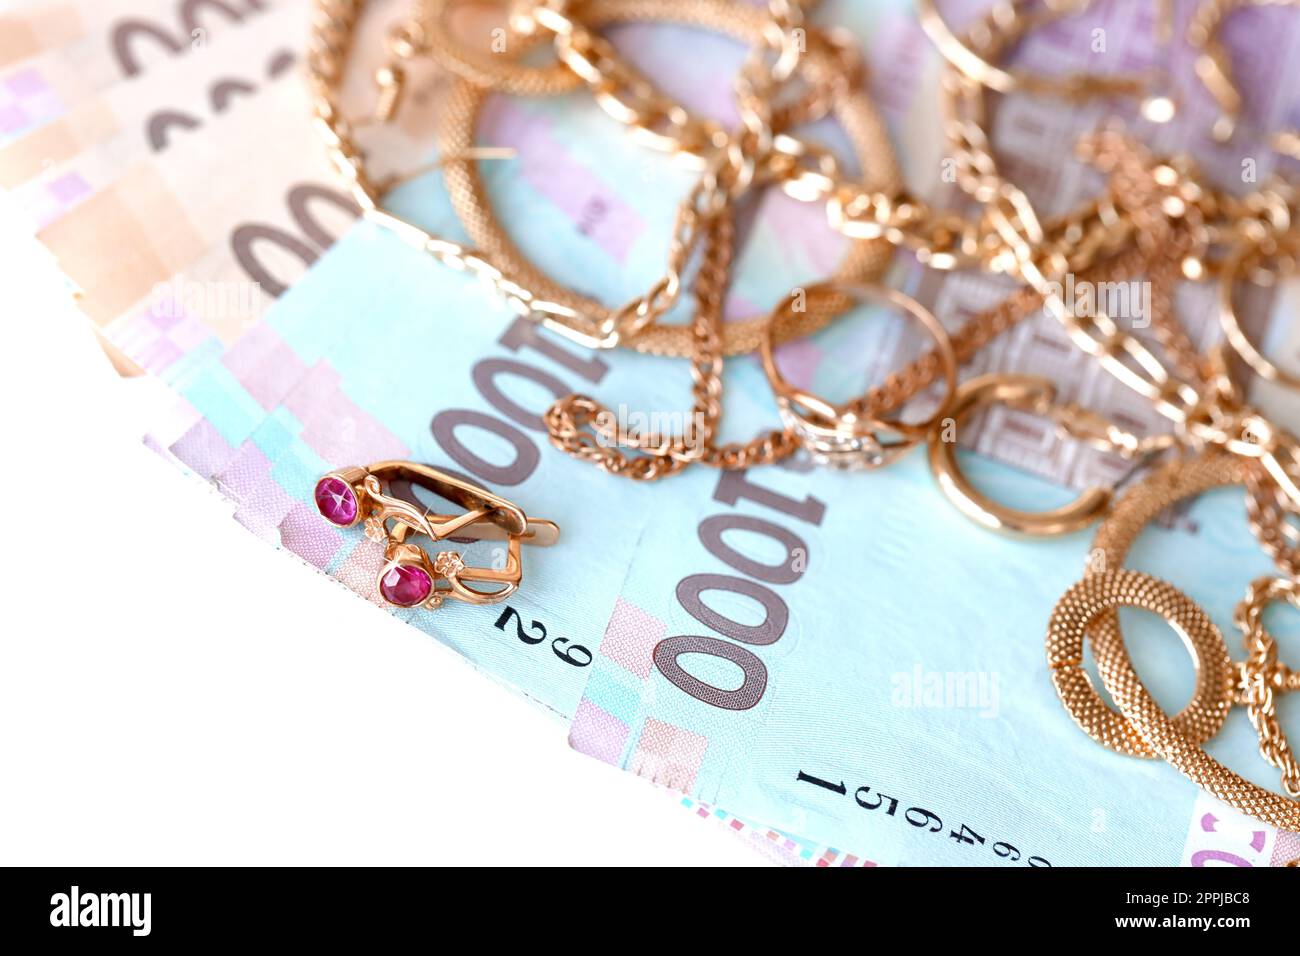 Many expensive golden jewerly rings, earrings and necklaces with big amount of Ukrainian money bills. Pawnshop or jewerly shop concept. Jewelry trading Stock Photo